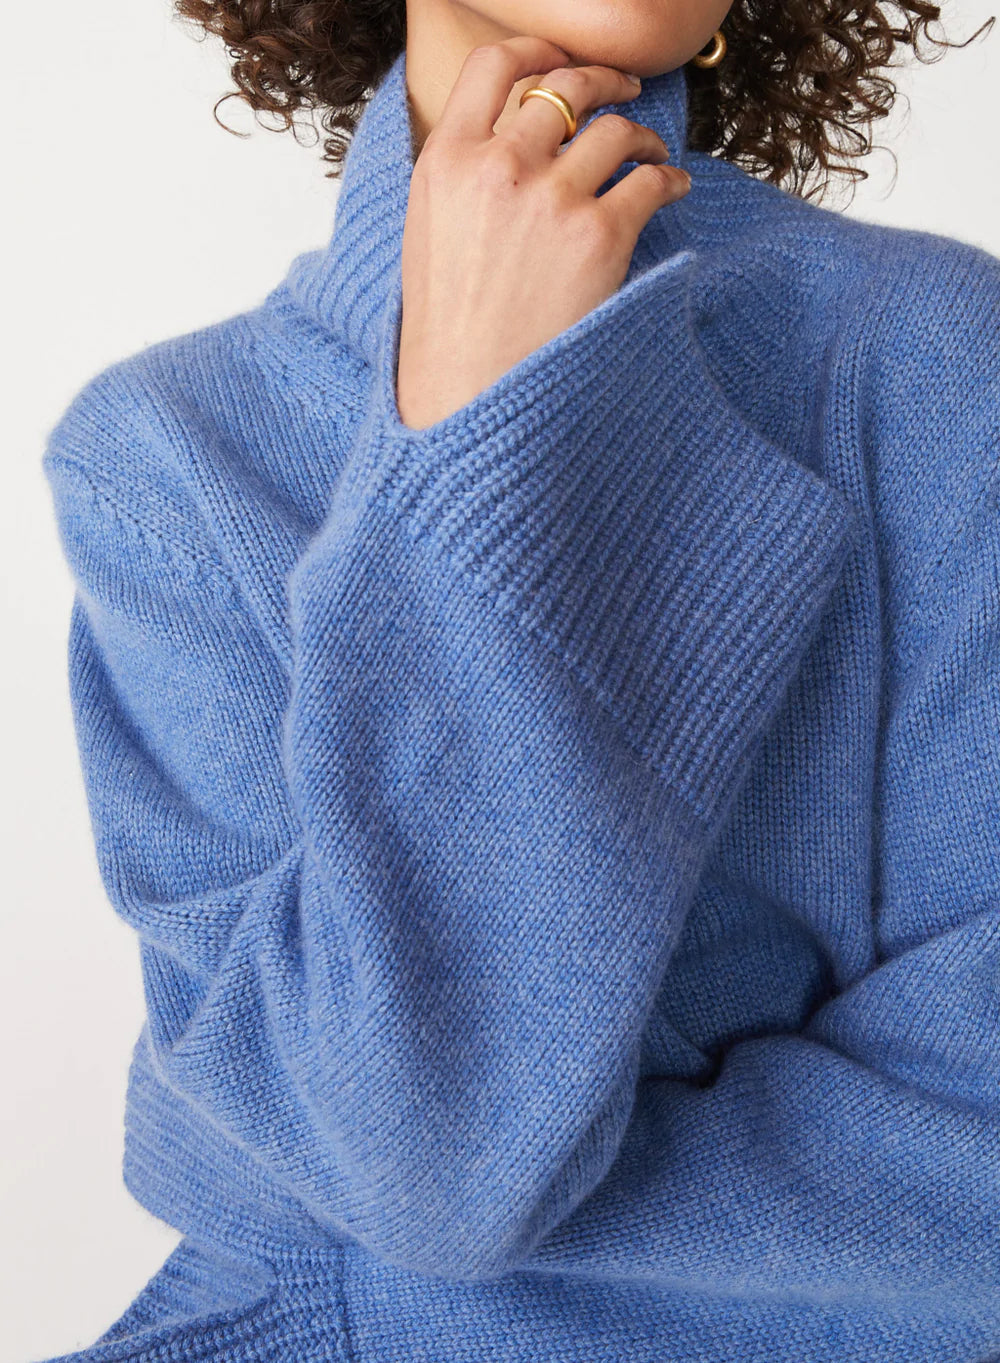 Cozy Cashmere Turtleneck Sweater - Shirts & Tops